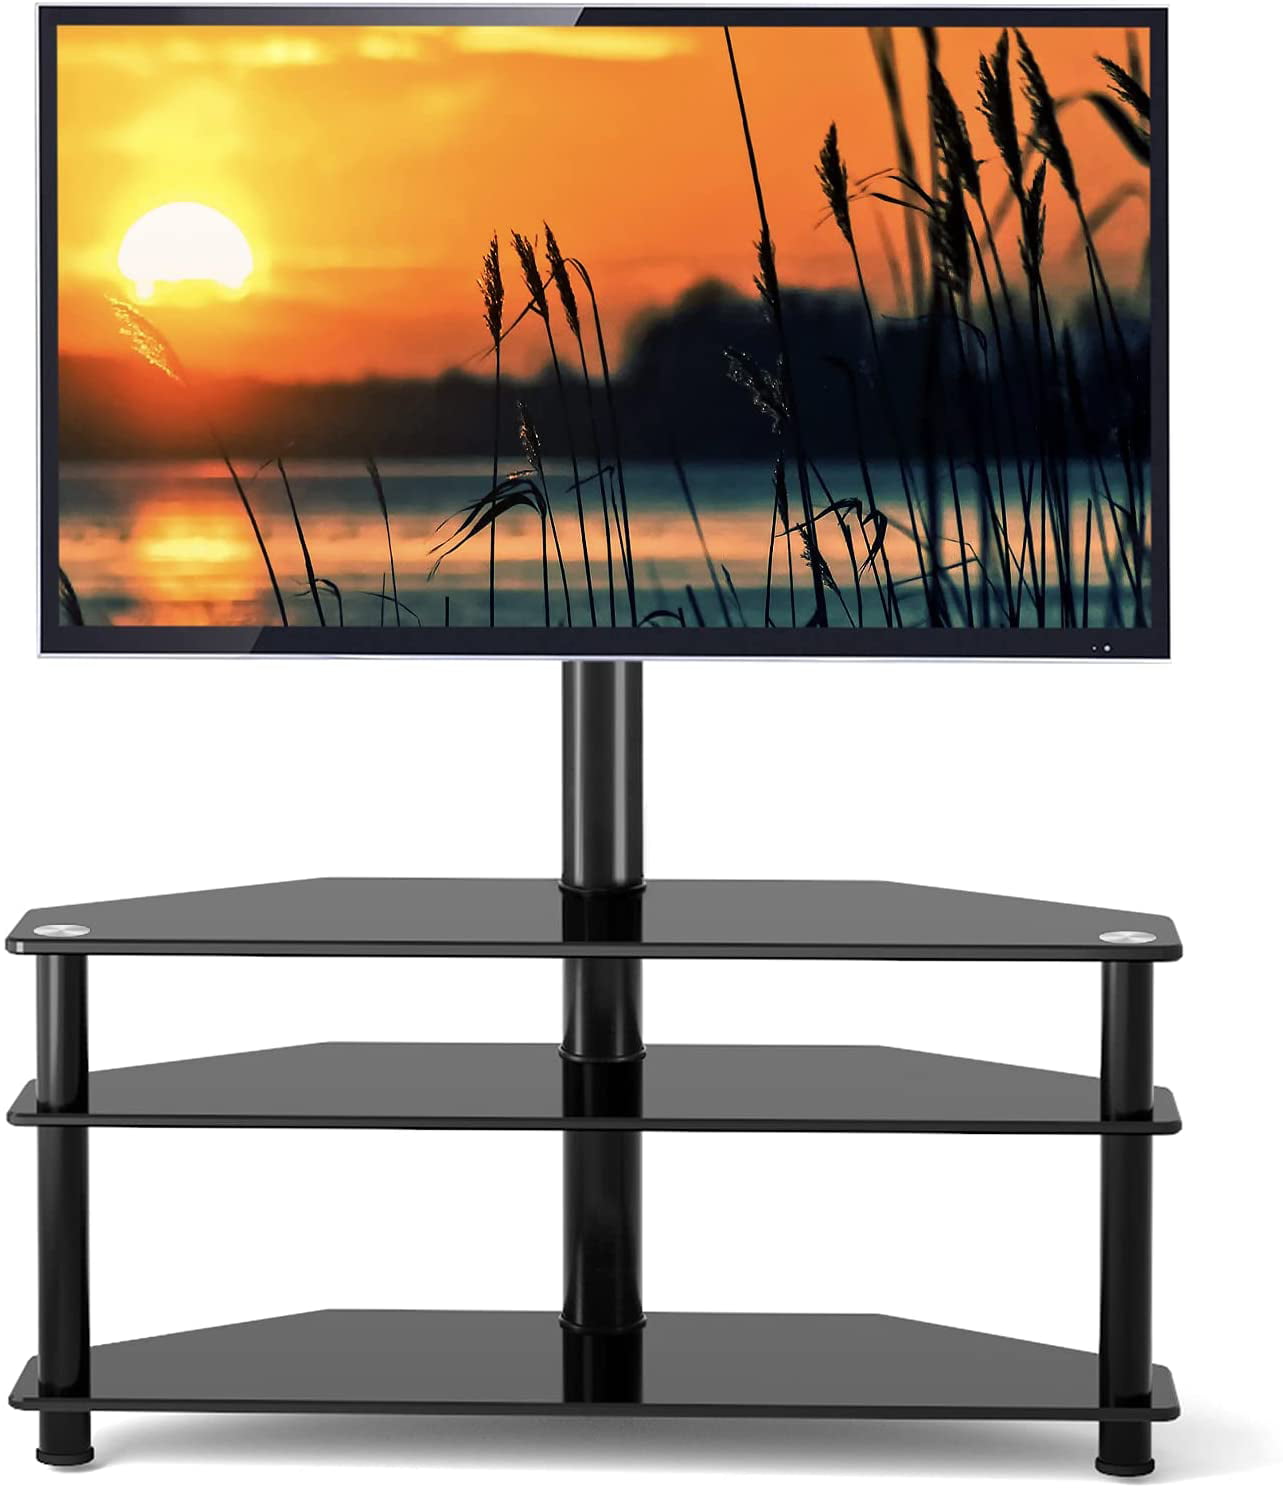 Swivel Glass TV Stand Mount for Most 32-70 inch LCD LED OLED TVs 